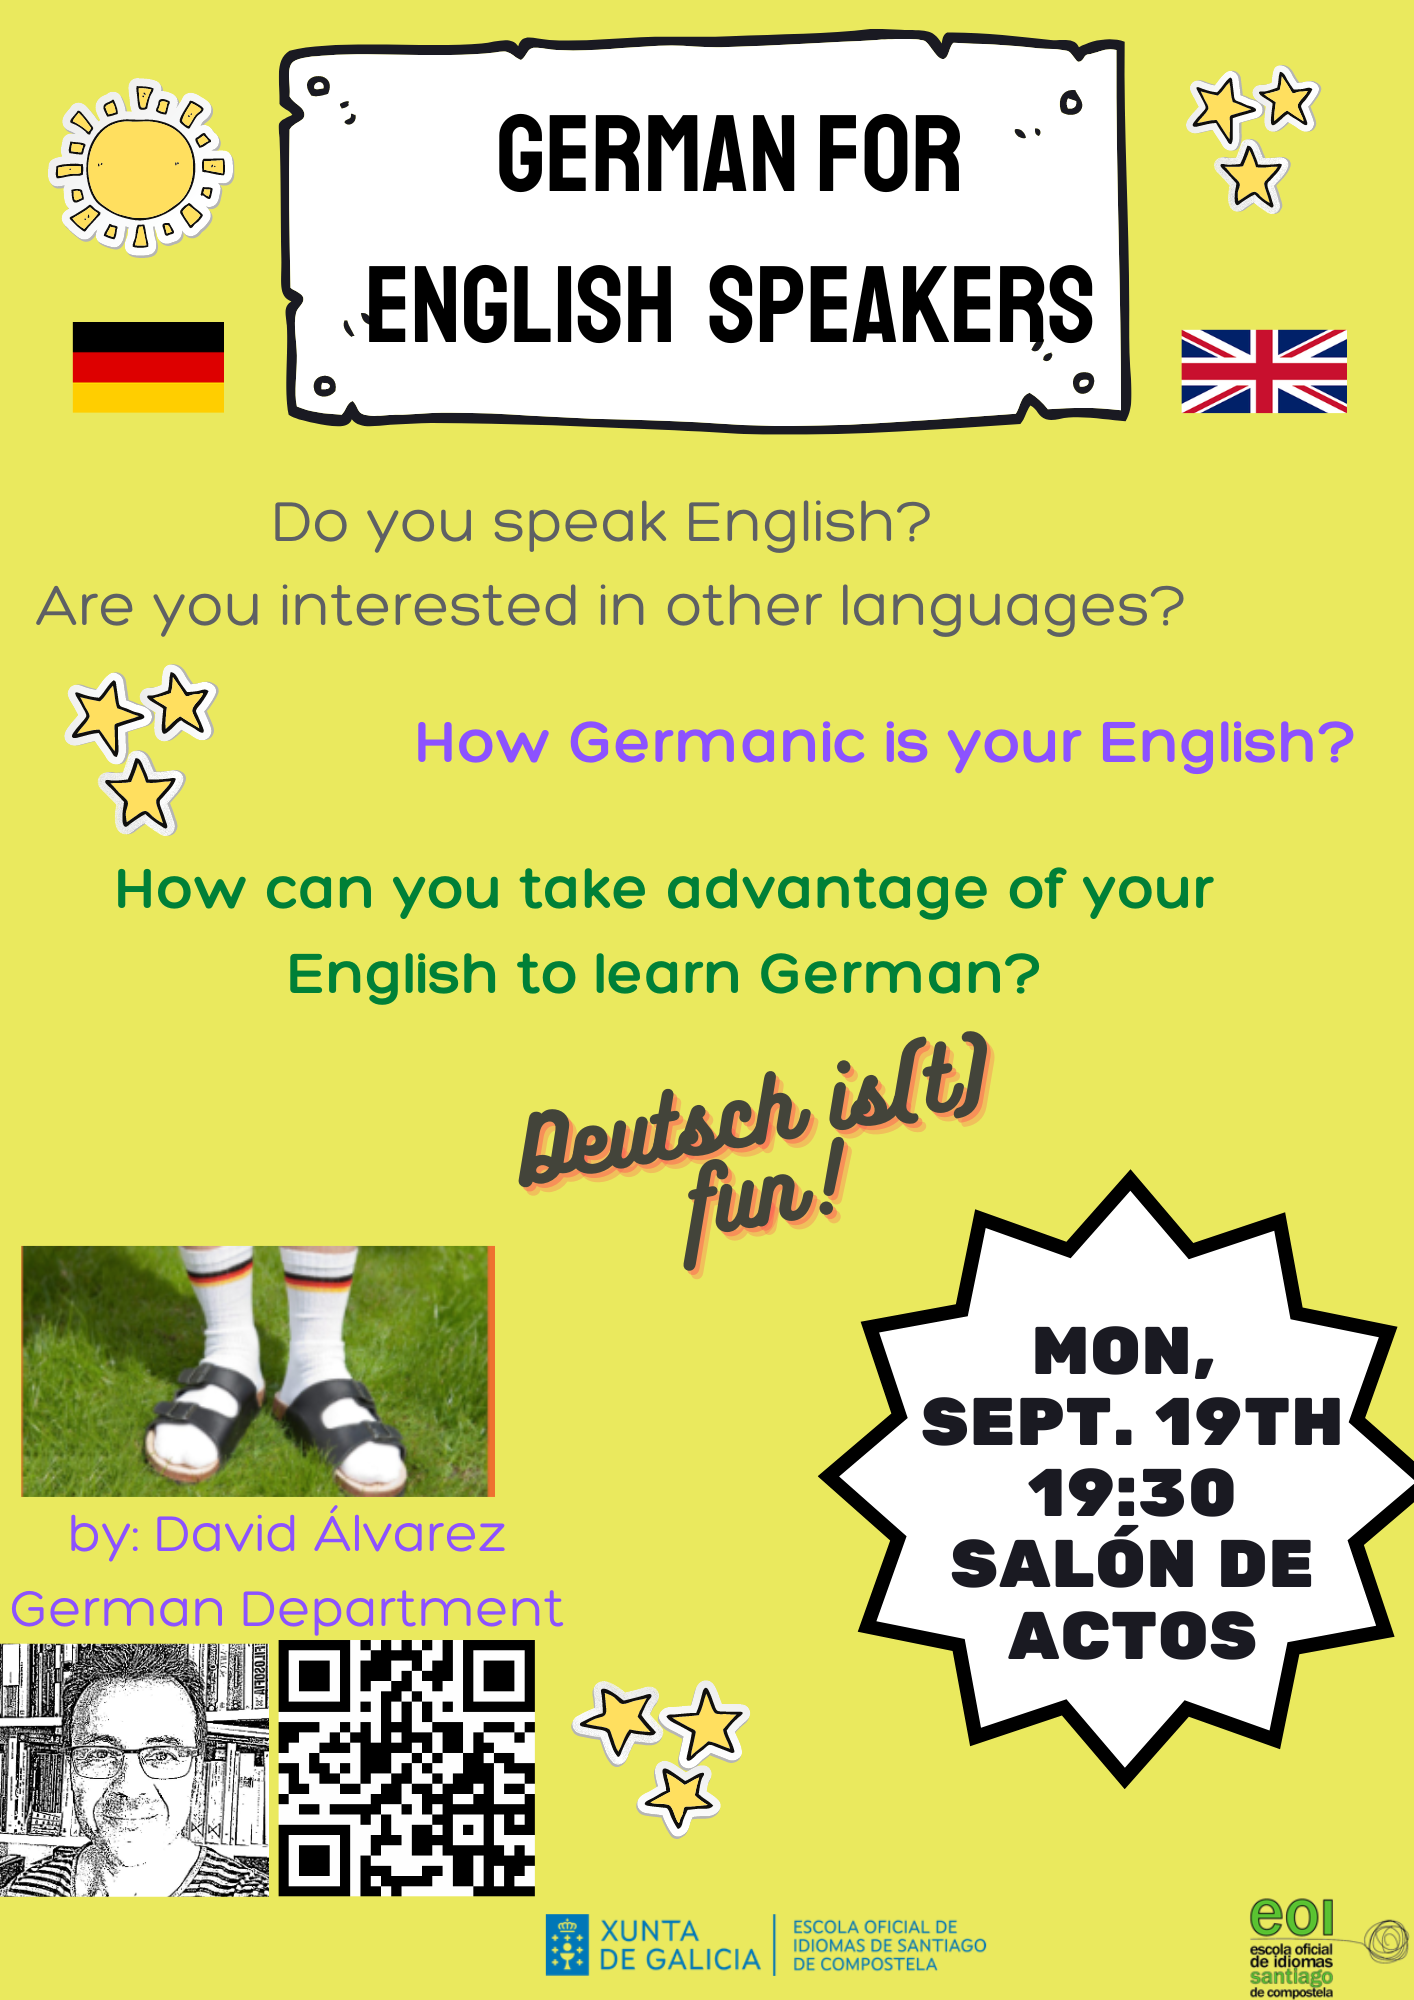 German for English speakers